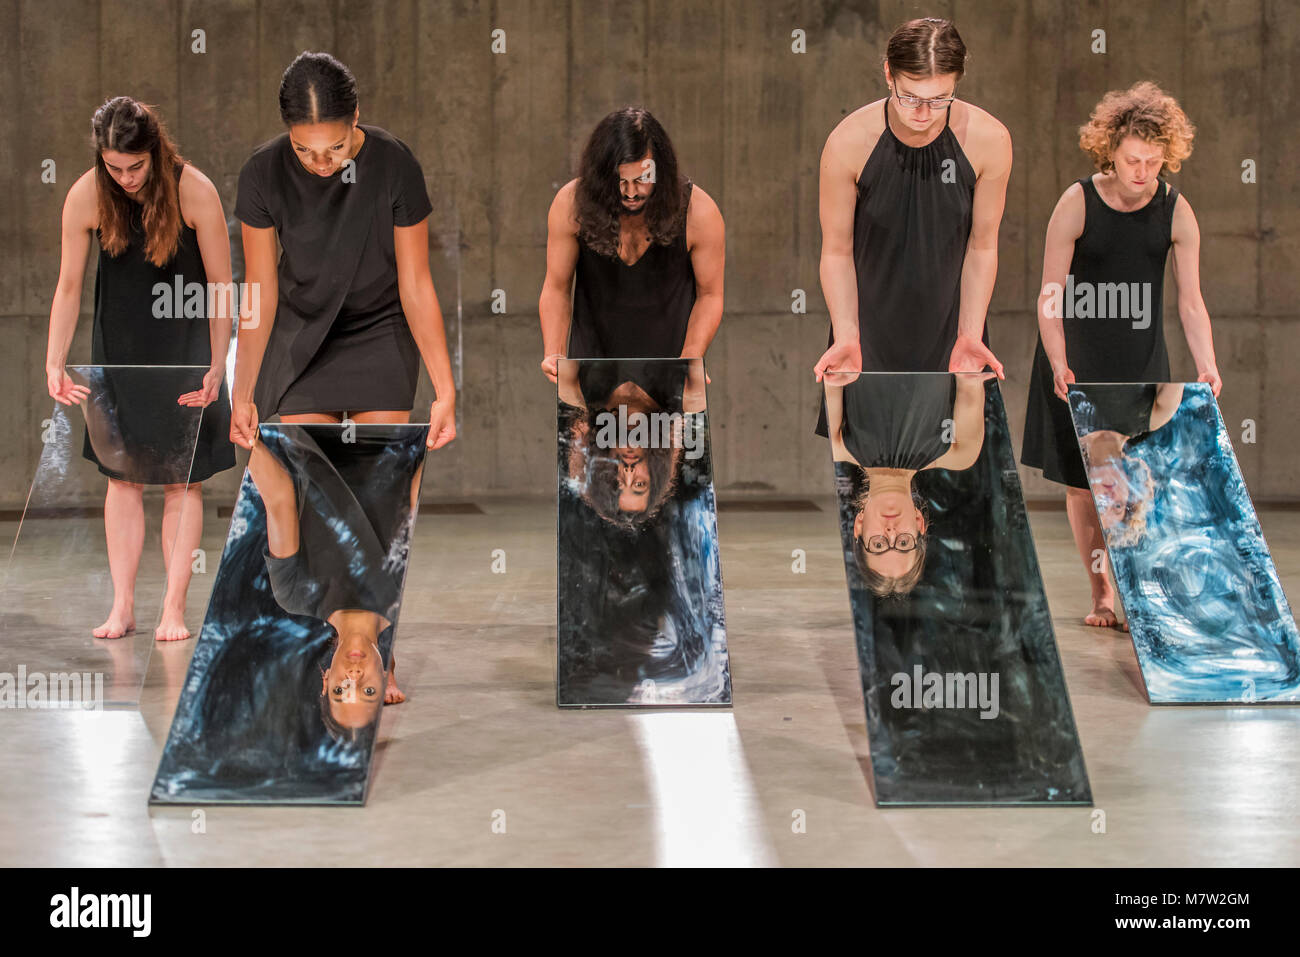 London, UK. 13th March, 2018. Mirror Piece II, an early work in which a group of performers make choreographed movements while holding tall; narrow mirrors - Joan Jonas, Tate Modern opens largest survey of pioneering performance artist’s work from her five decade career. It includes an immersive gallery exhibition and live performance programme. Credit: Guy Bell/Alamy Live News Stock Photo